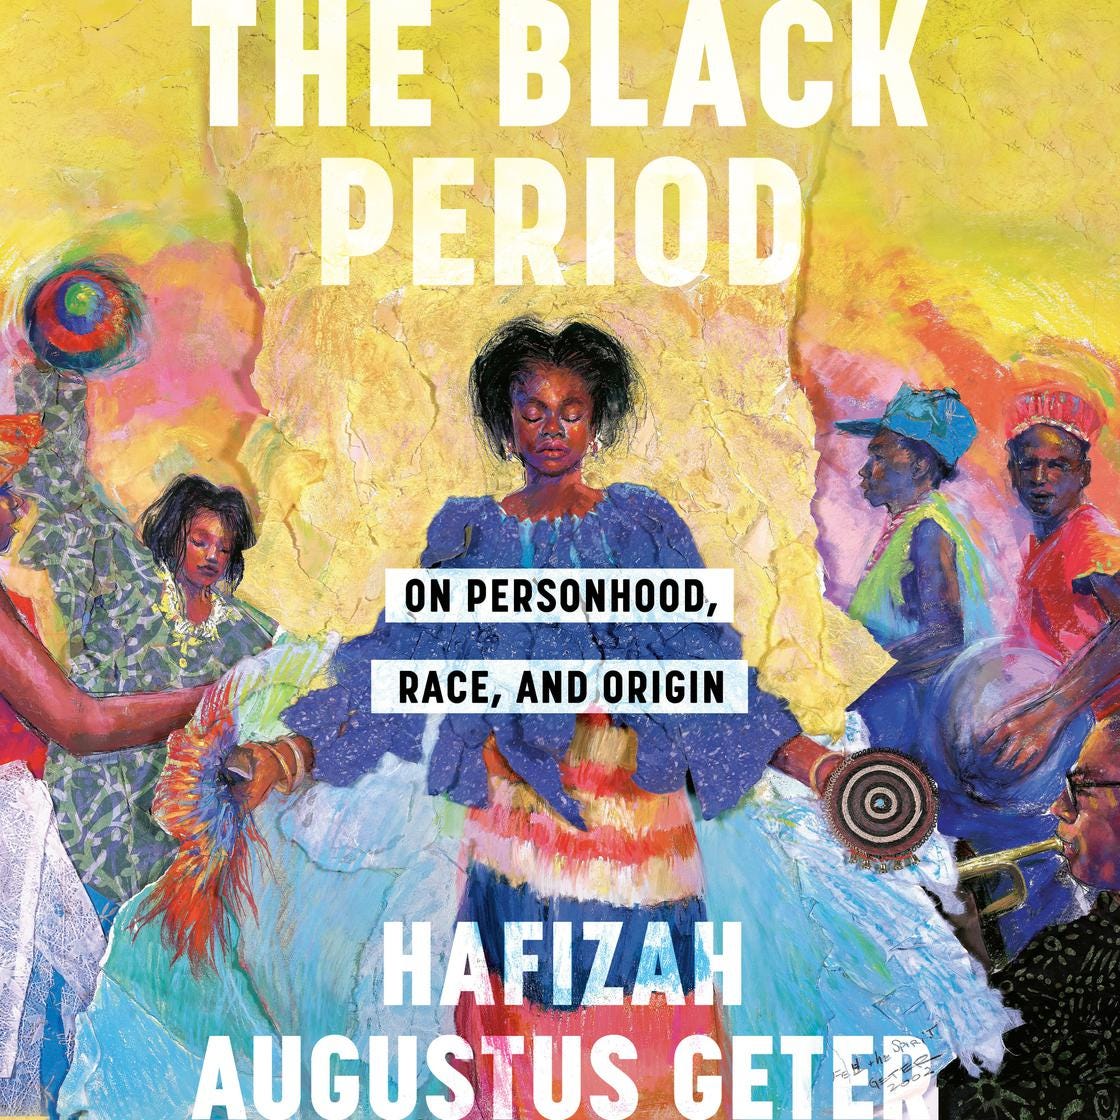 Cover of the audiobook of The Black Period.